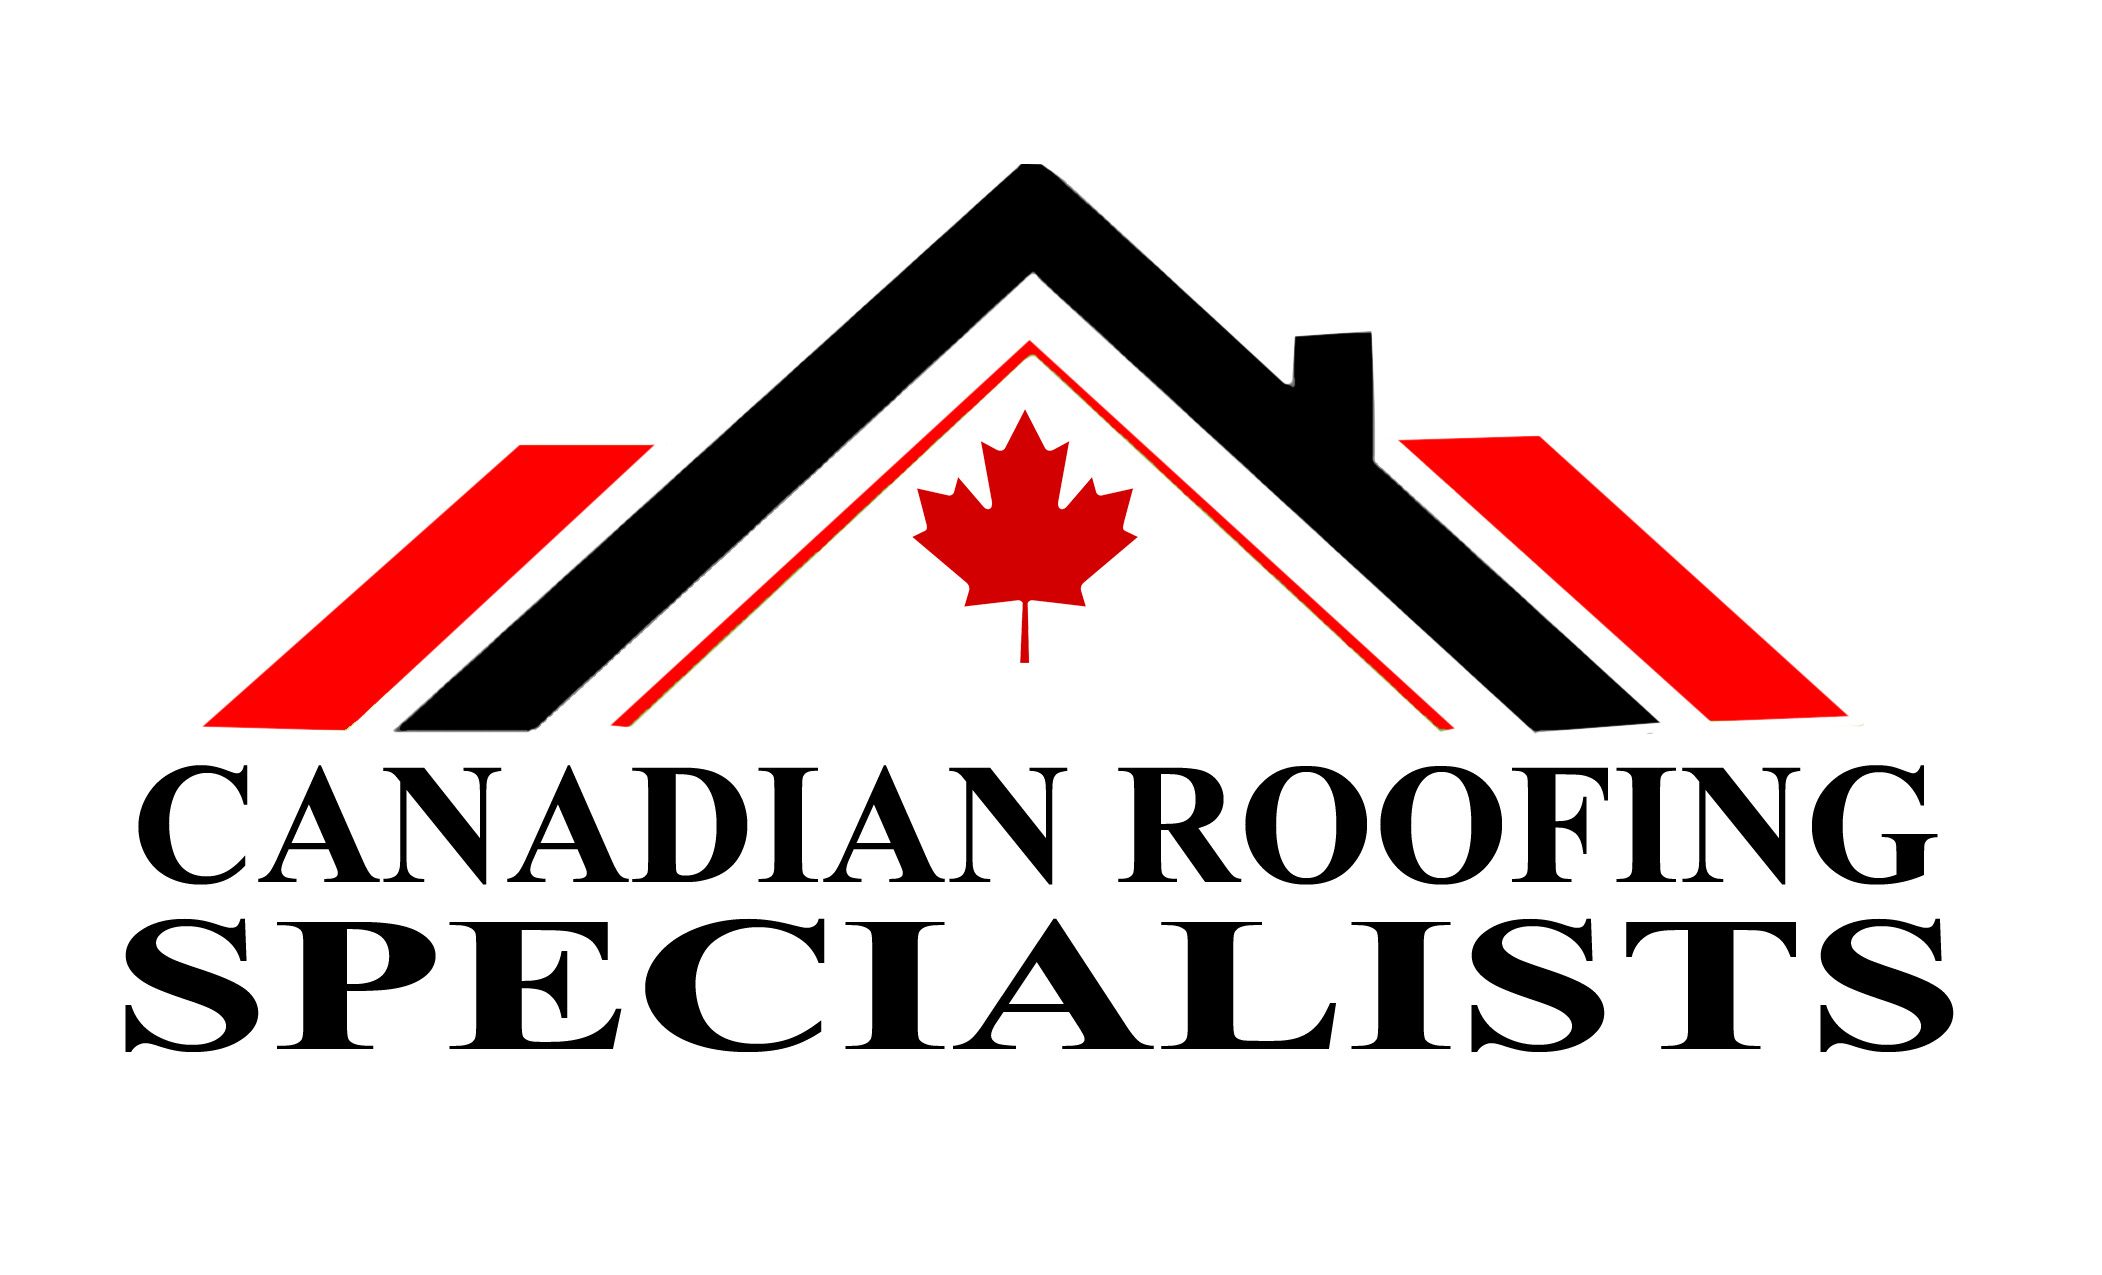 Canadian Roofing Specialists